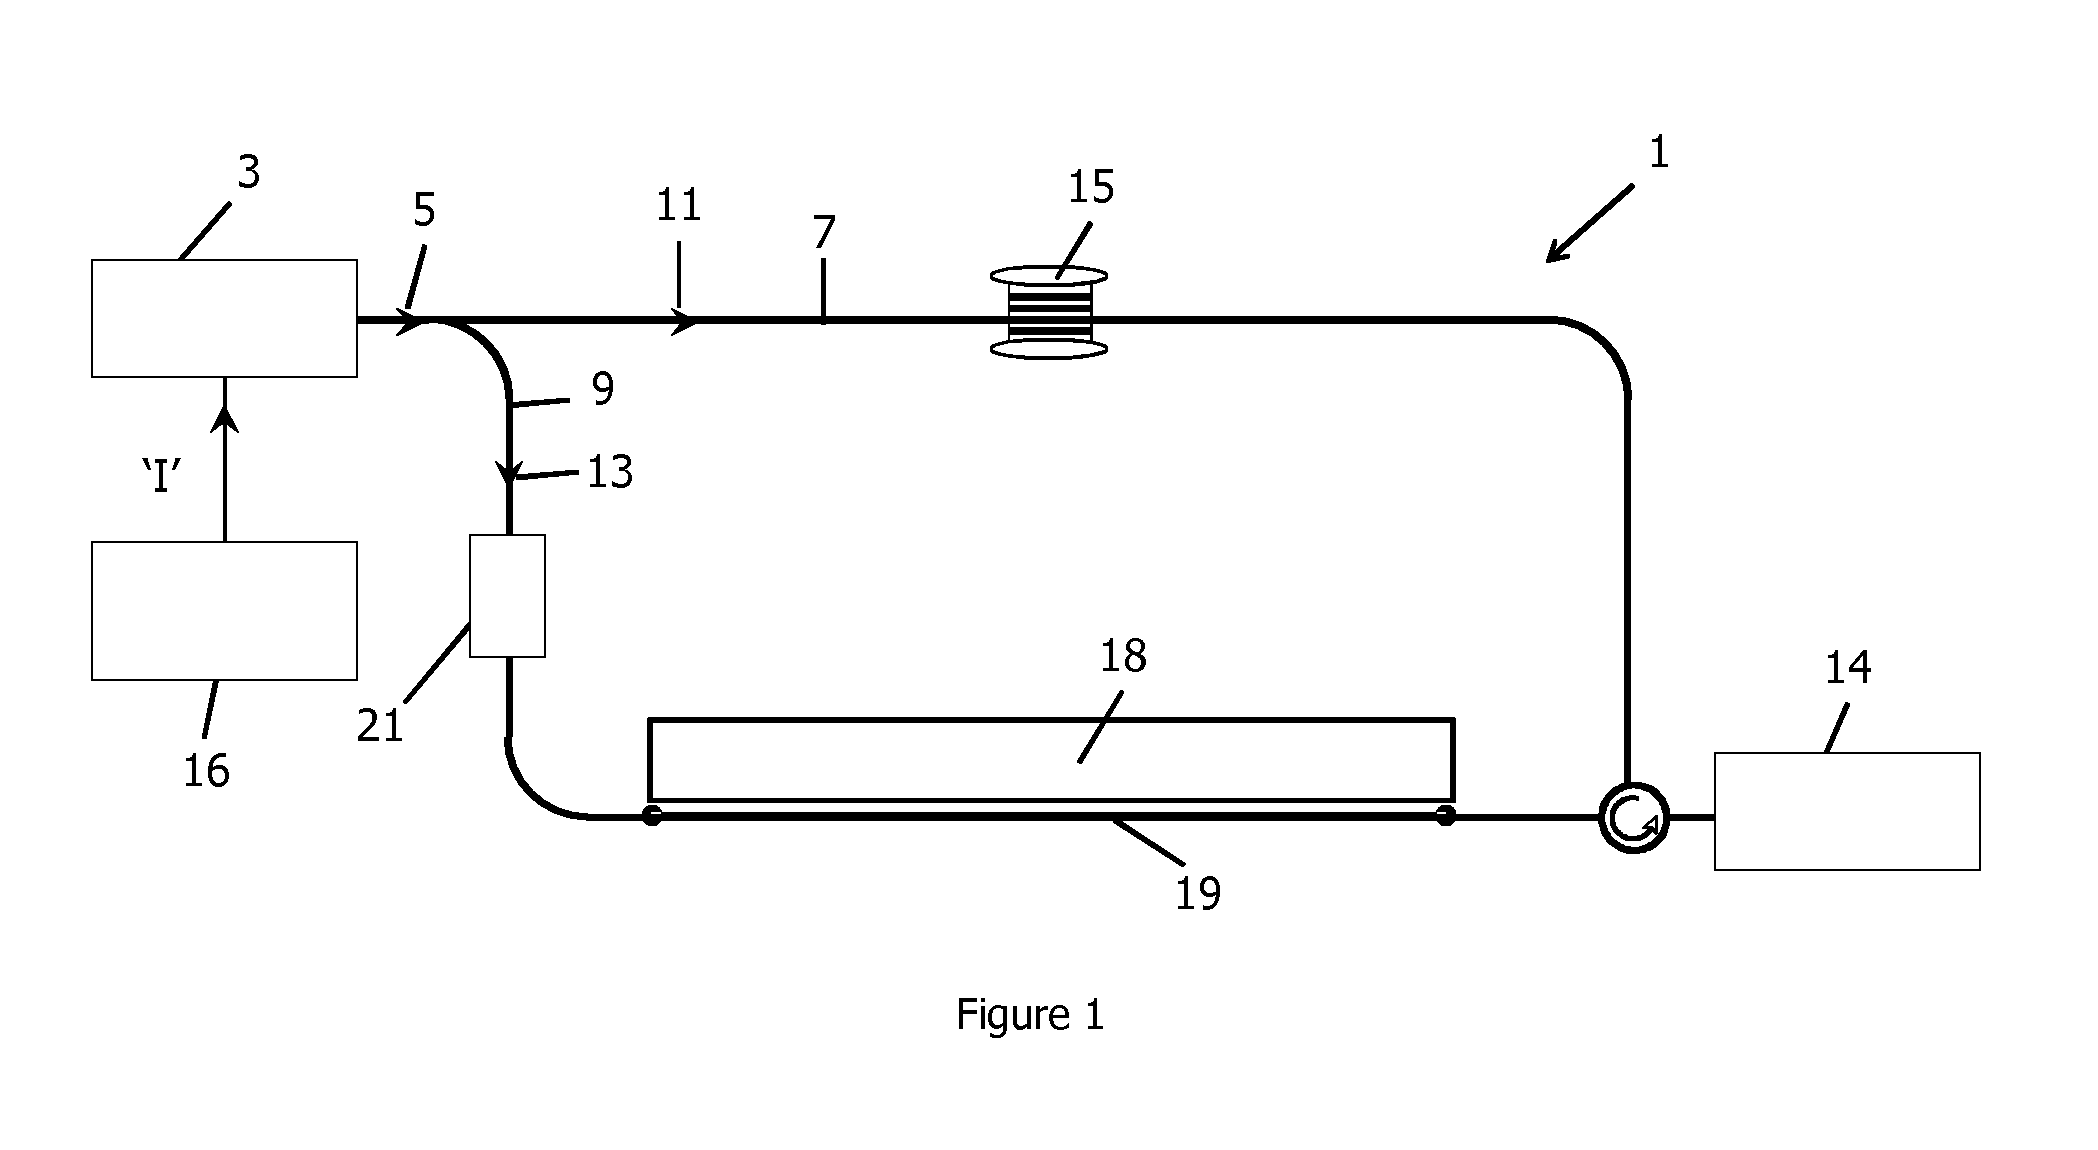 Sensing system and methods for distributed brillouin sensing